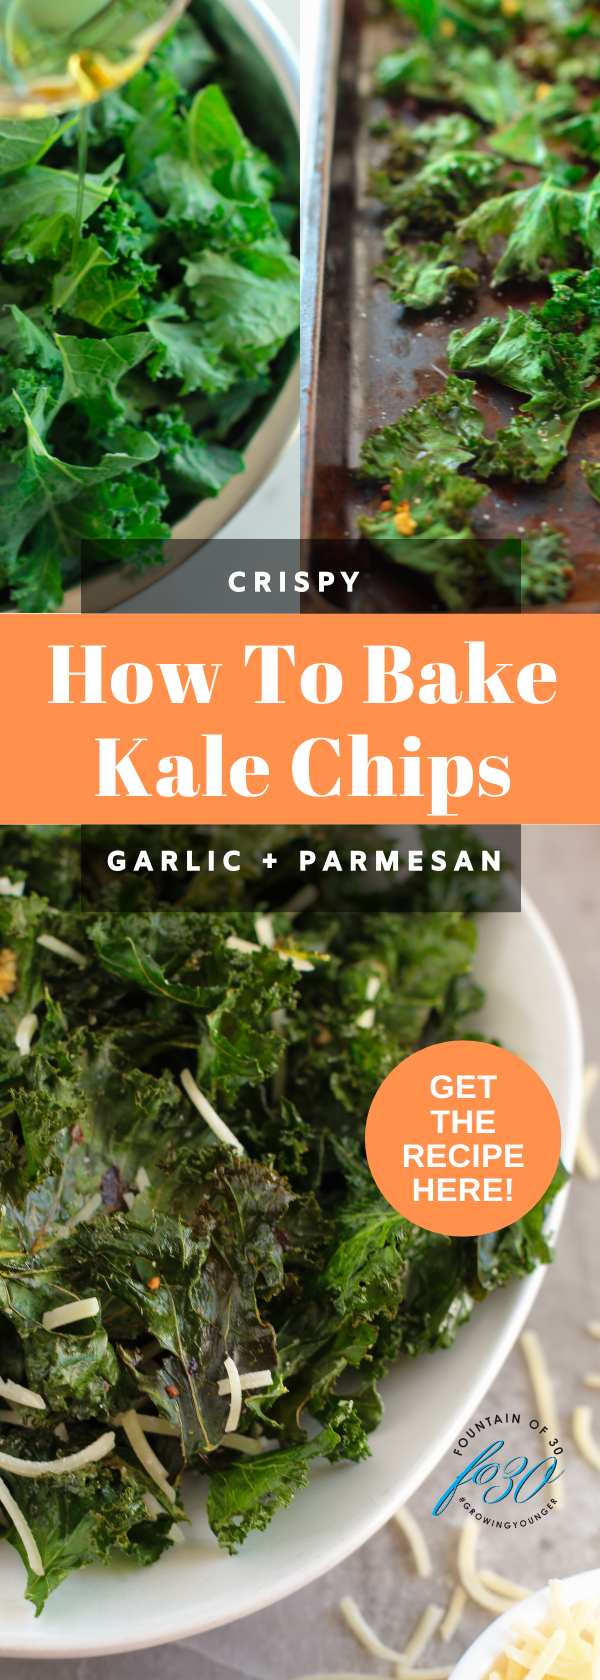 how to make kale chips fountainof30